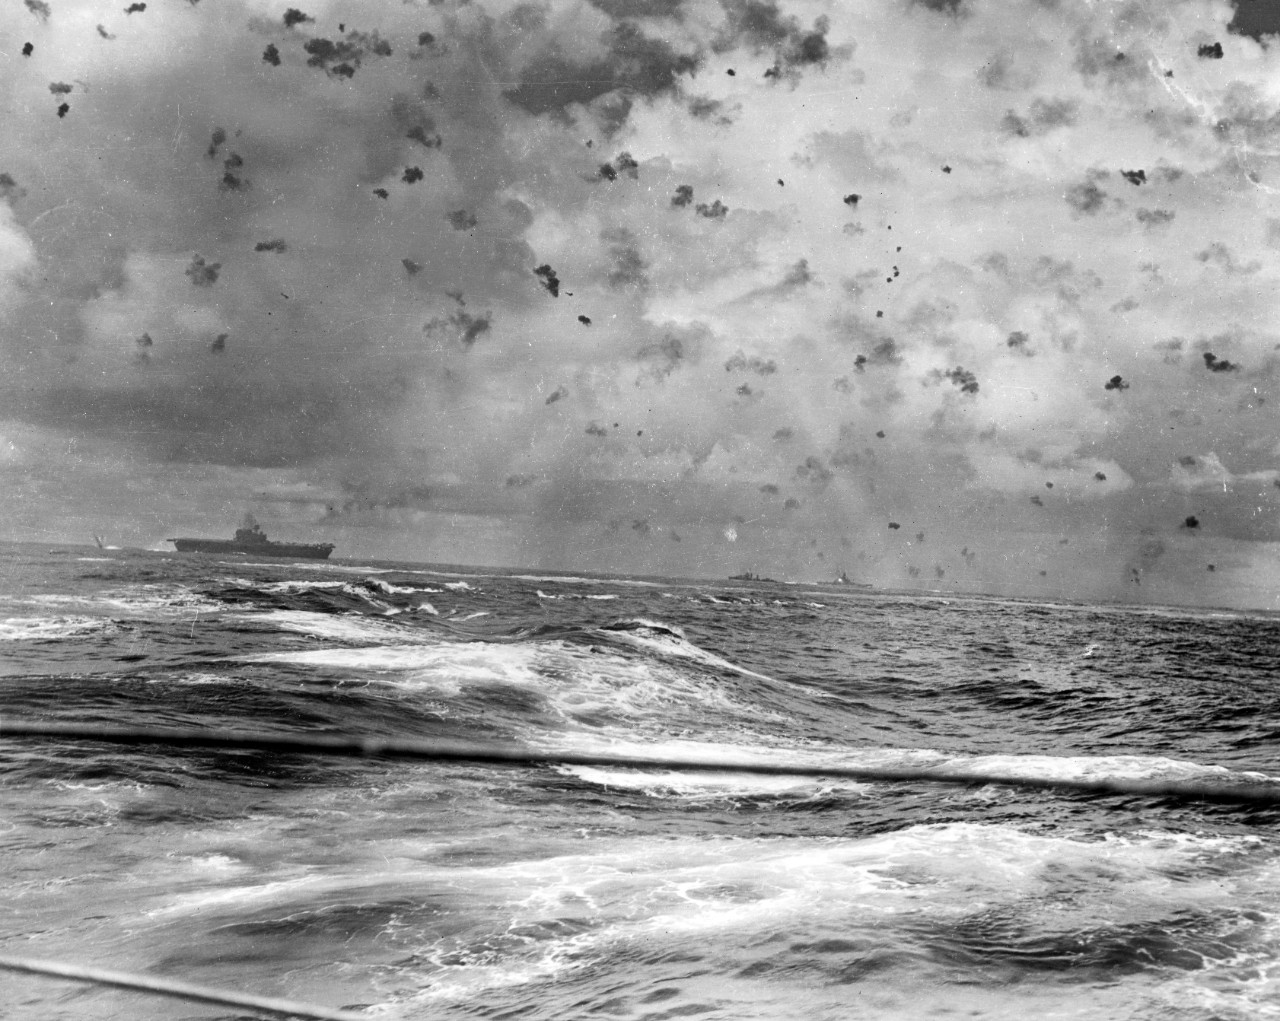 Antiaircraft gunners desperately fill the sky with flak and ships churn the water as they maneuver at speed and fight off the Japanese attackers, 26 October 1942. At least two enemy planes are visible above Enterprise, and the blast of South Dako...